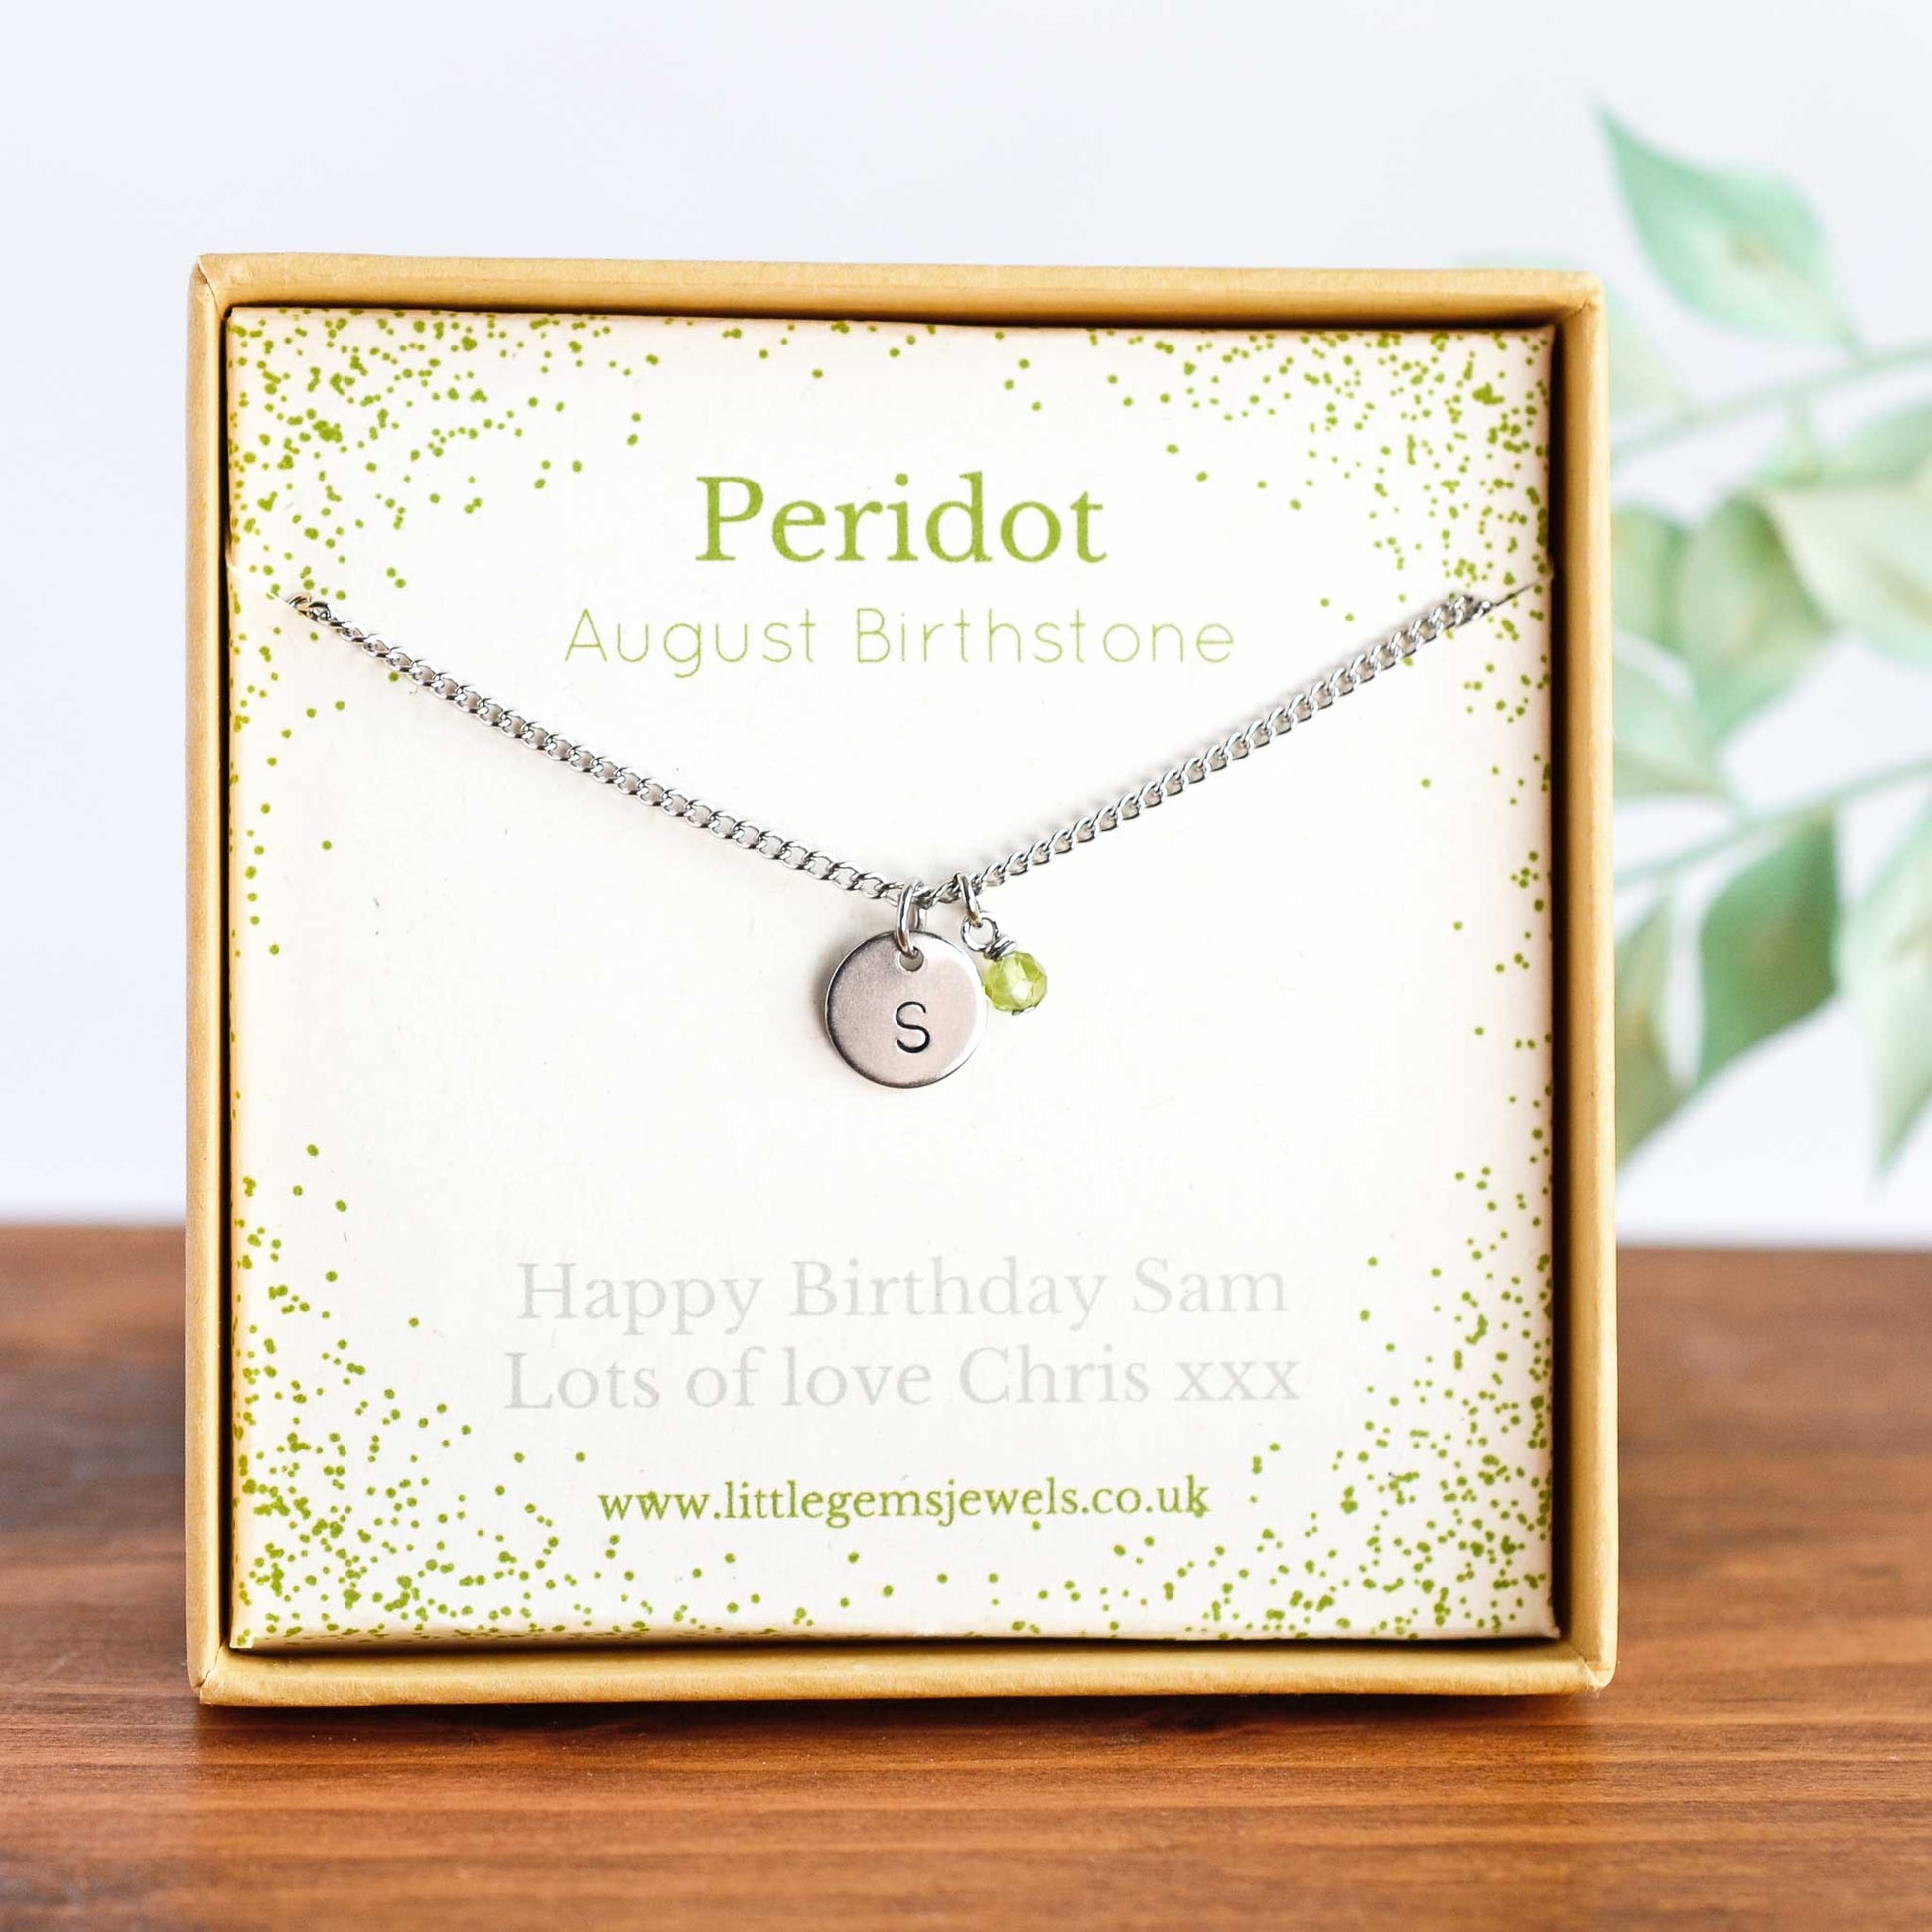 August Birthstone necklace with initial charm & personalised gift message in eco friendly gift box